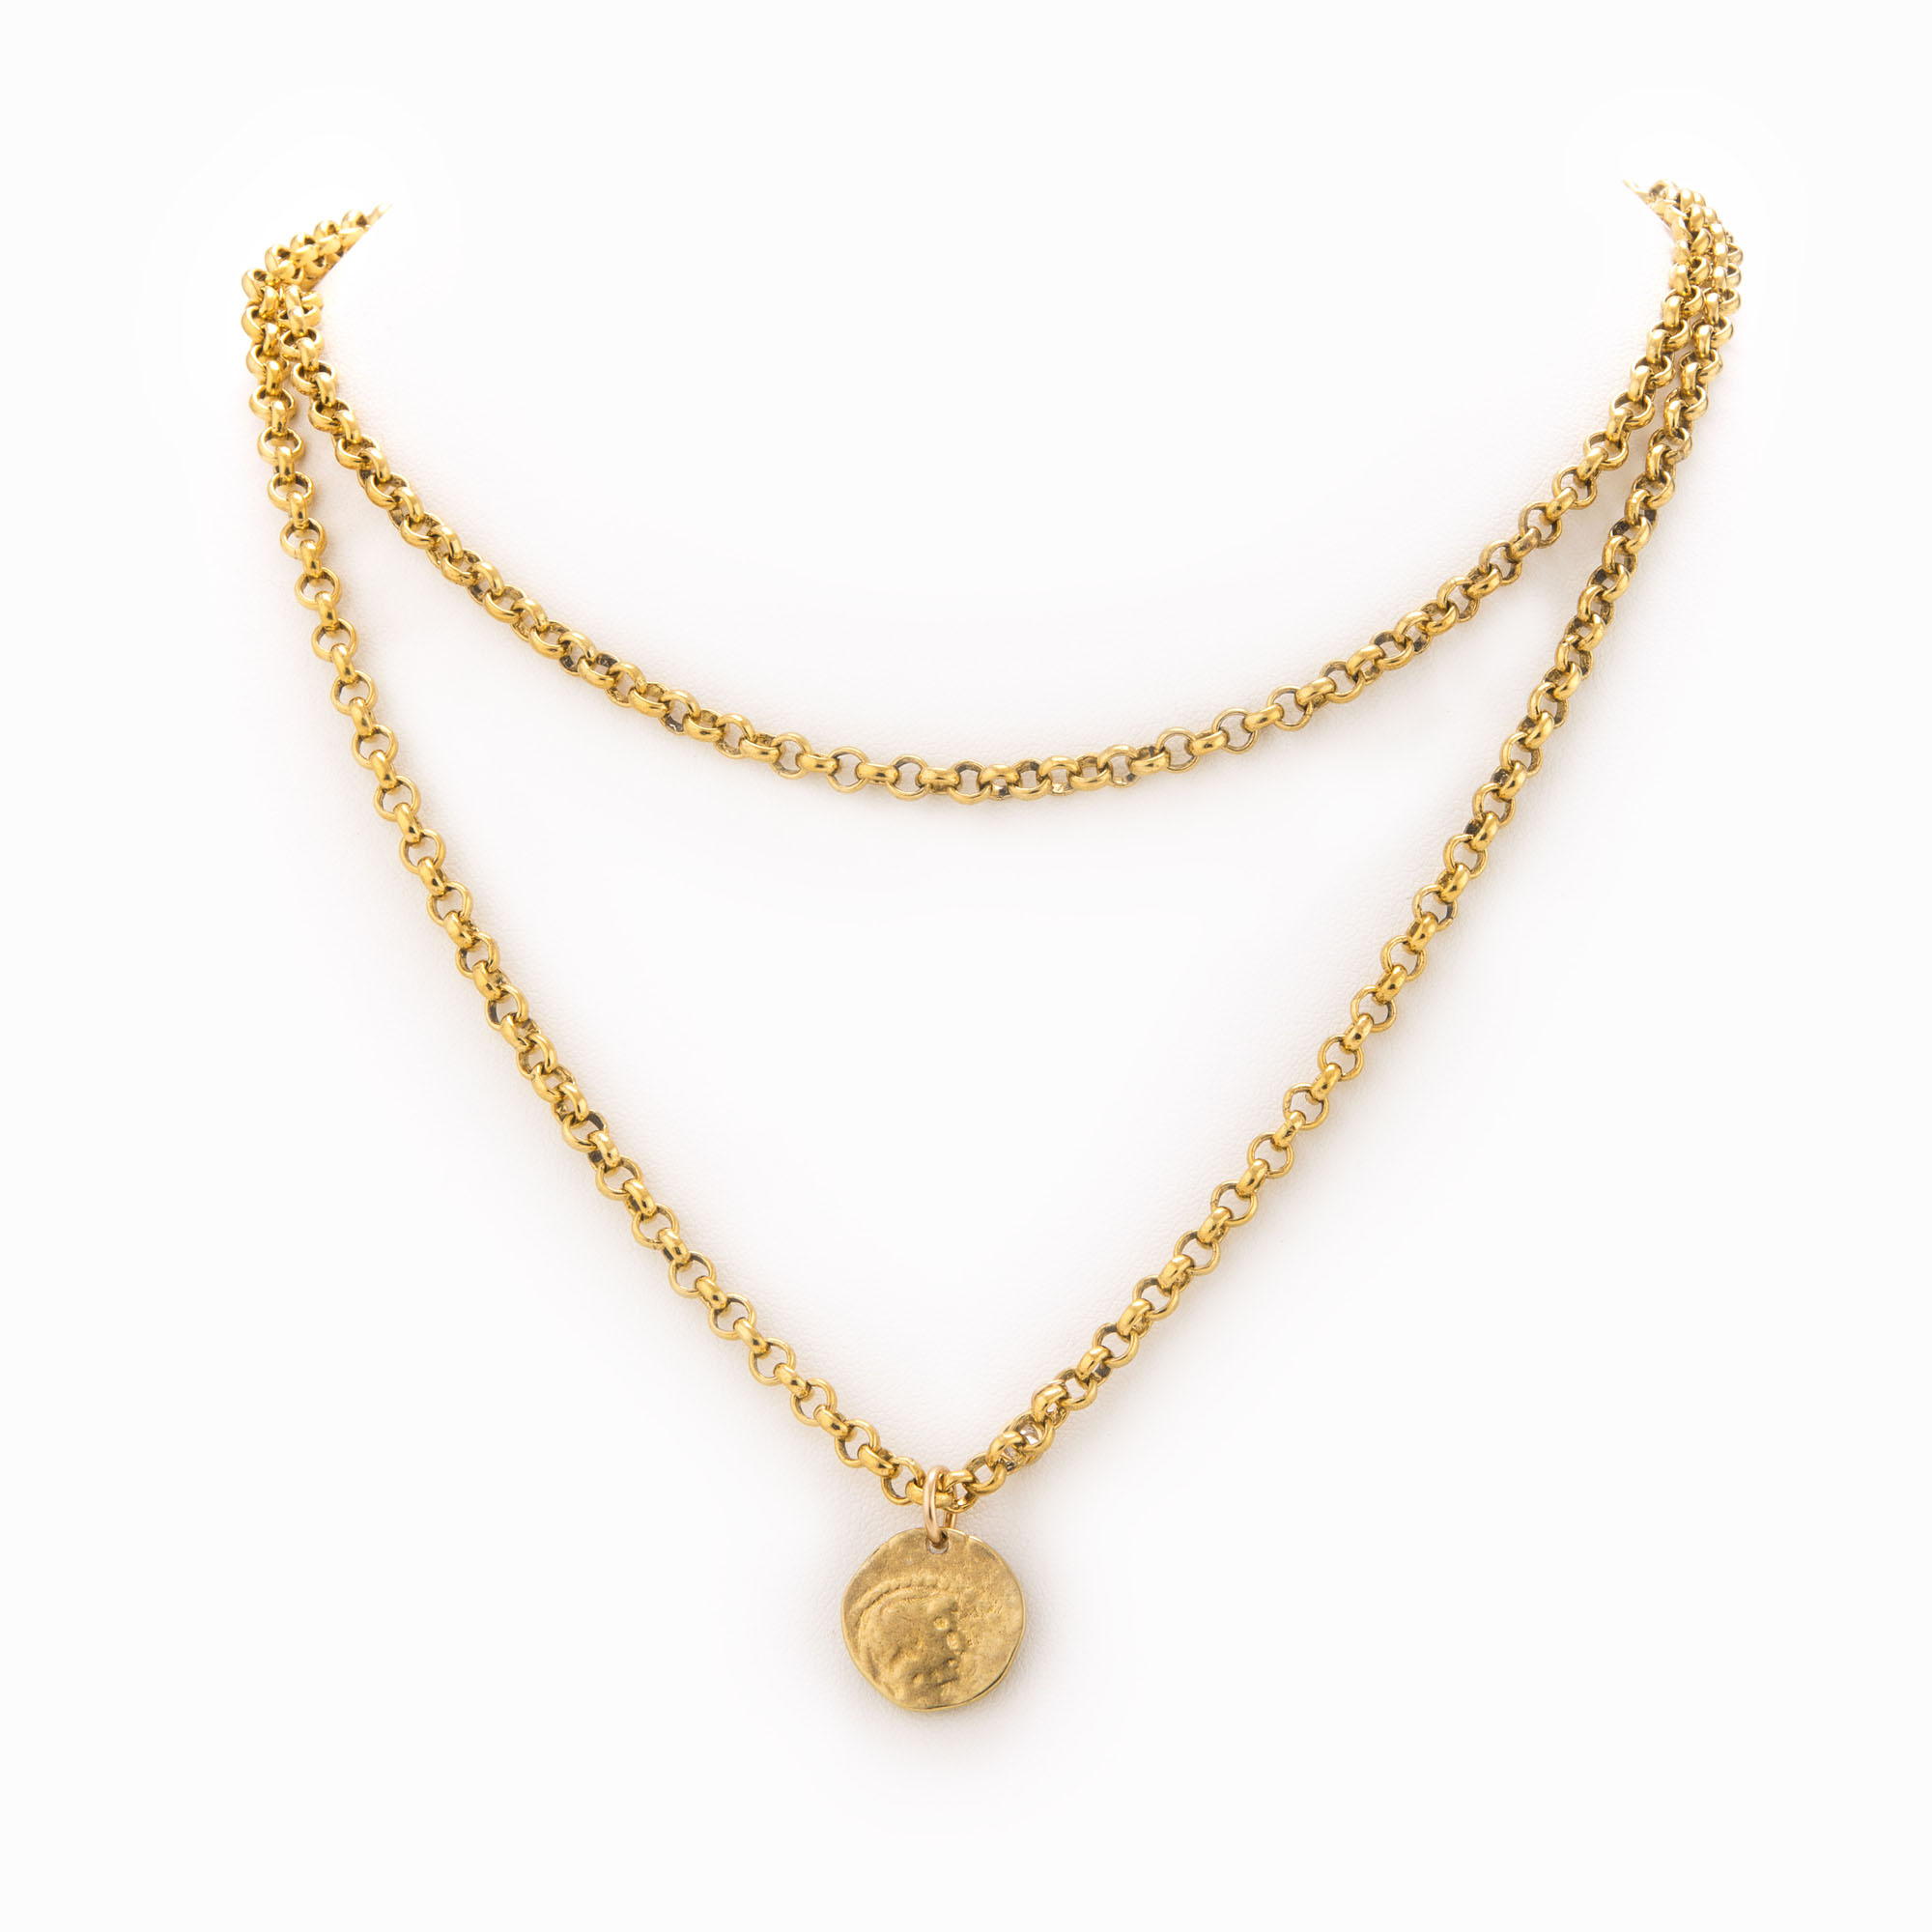 Featured image for “Sage Layered Brass Necklace”